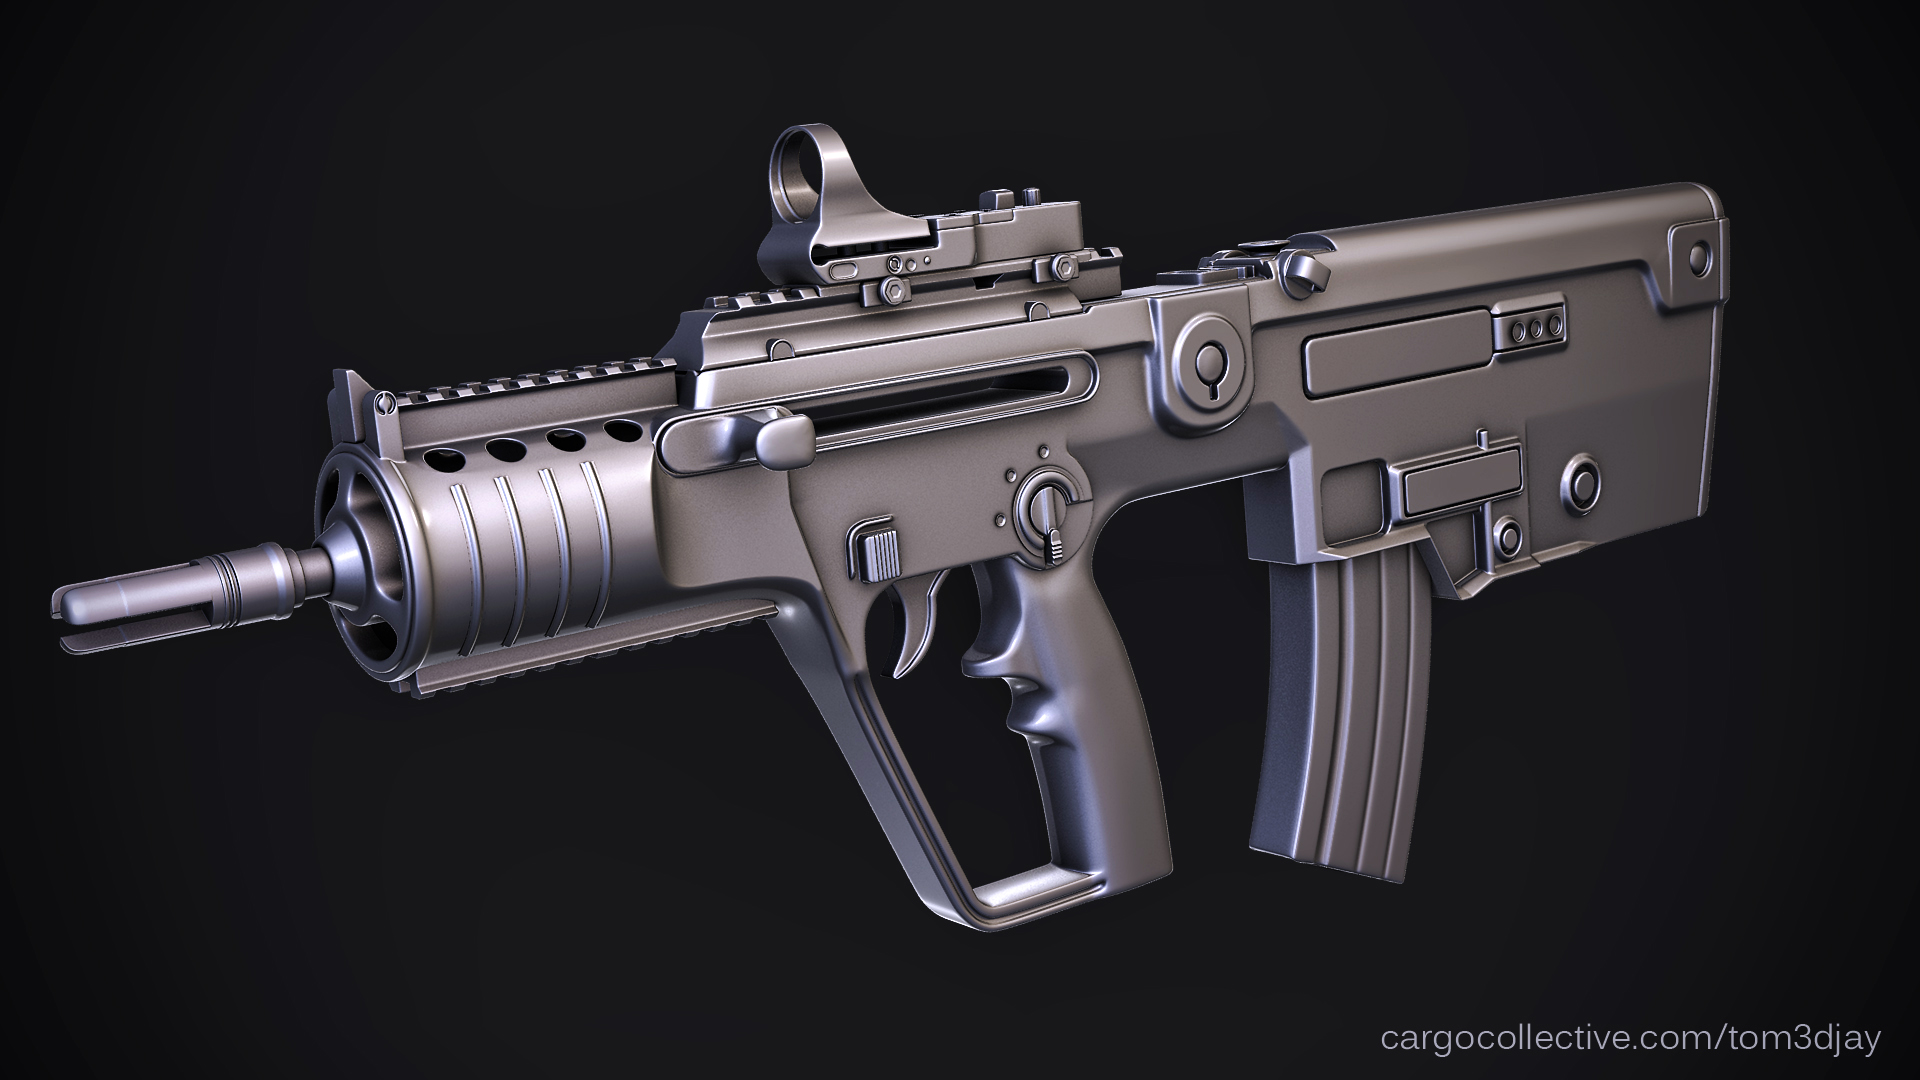 Amazing IWI Tavor Pictures & Backgrounds